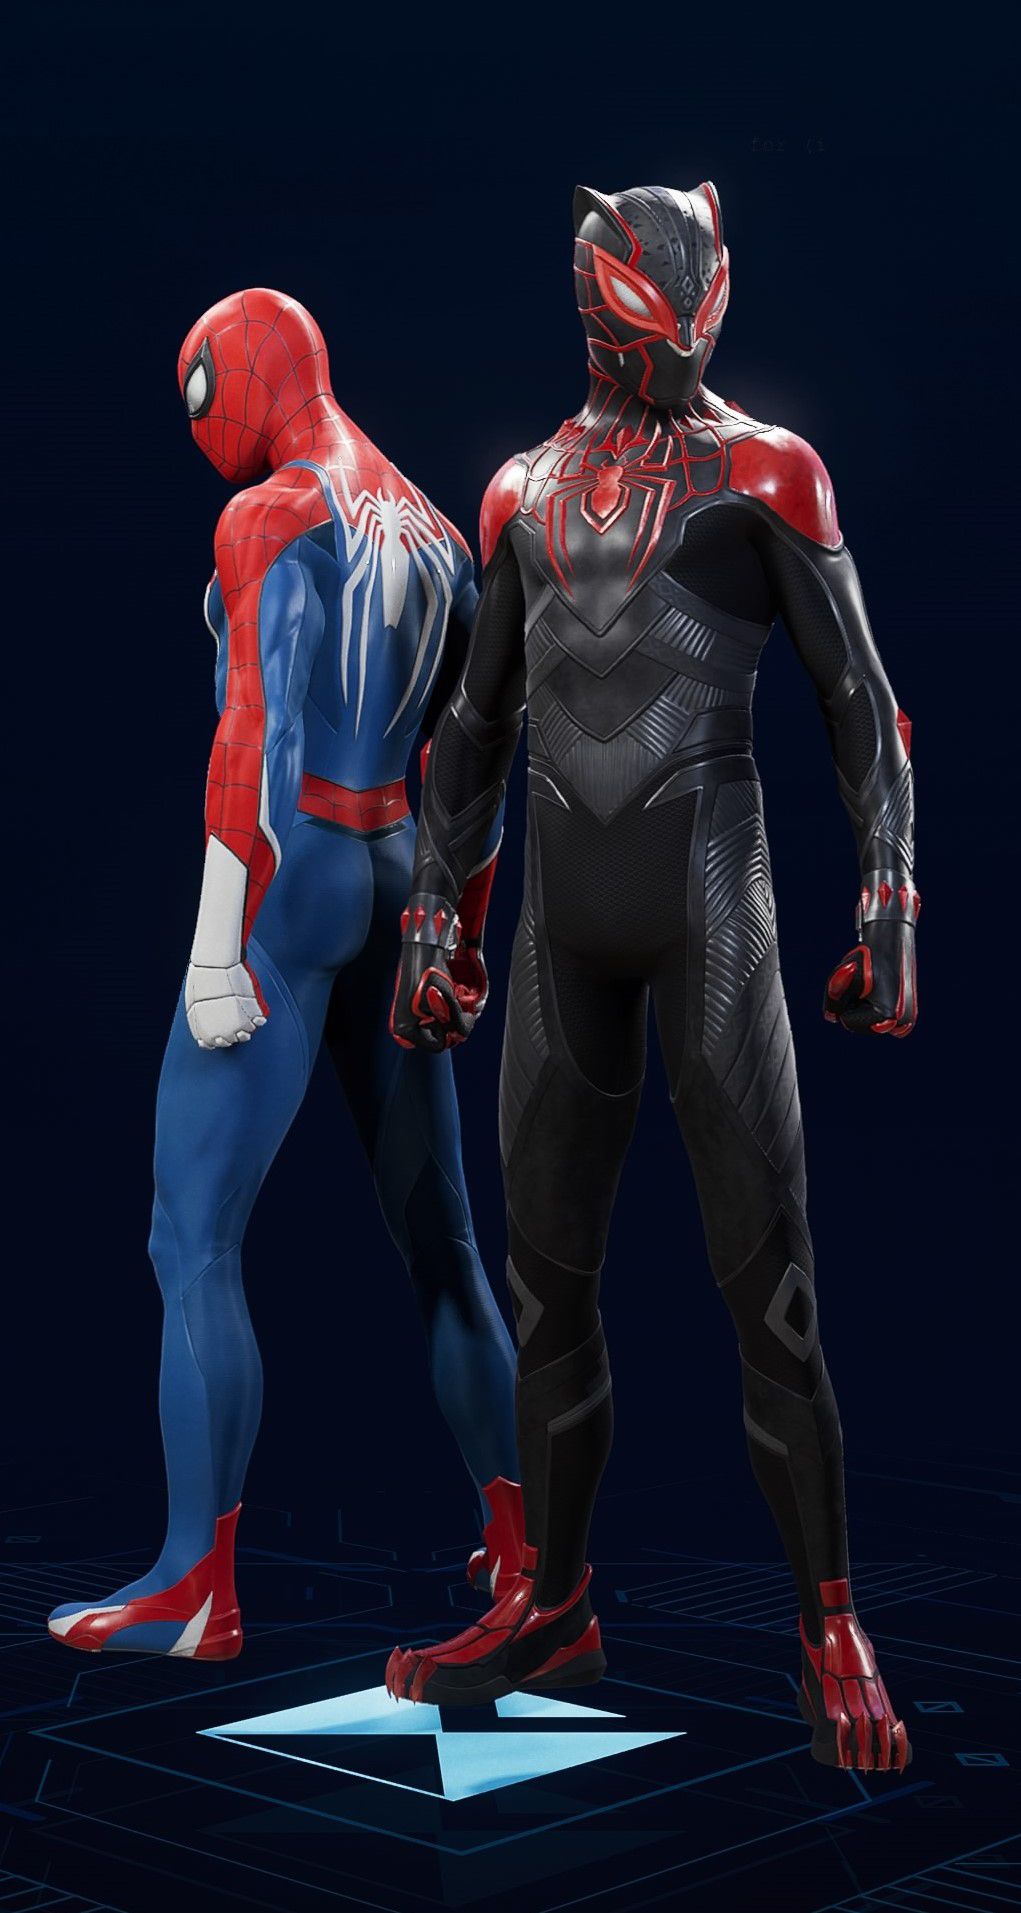 Miles Morales stands in his Forever Suit in the suit selection screen of Spider-Man 2.